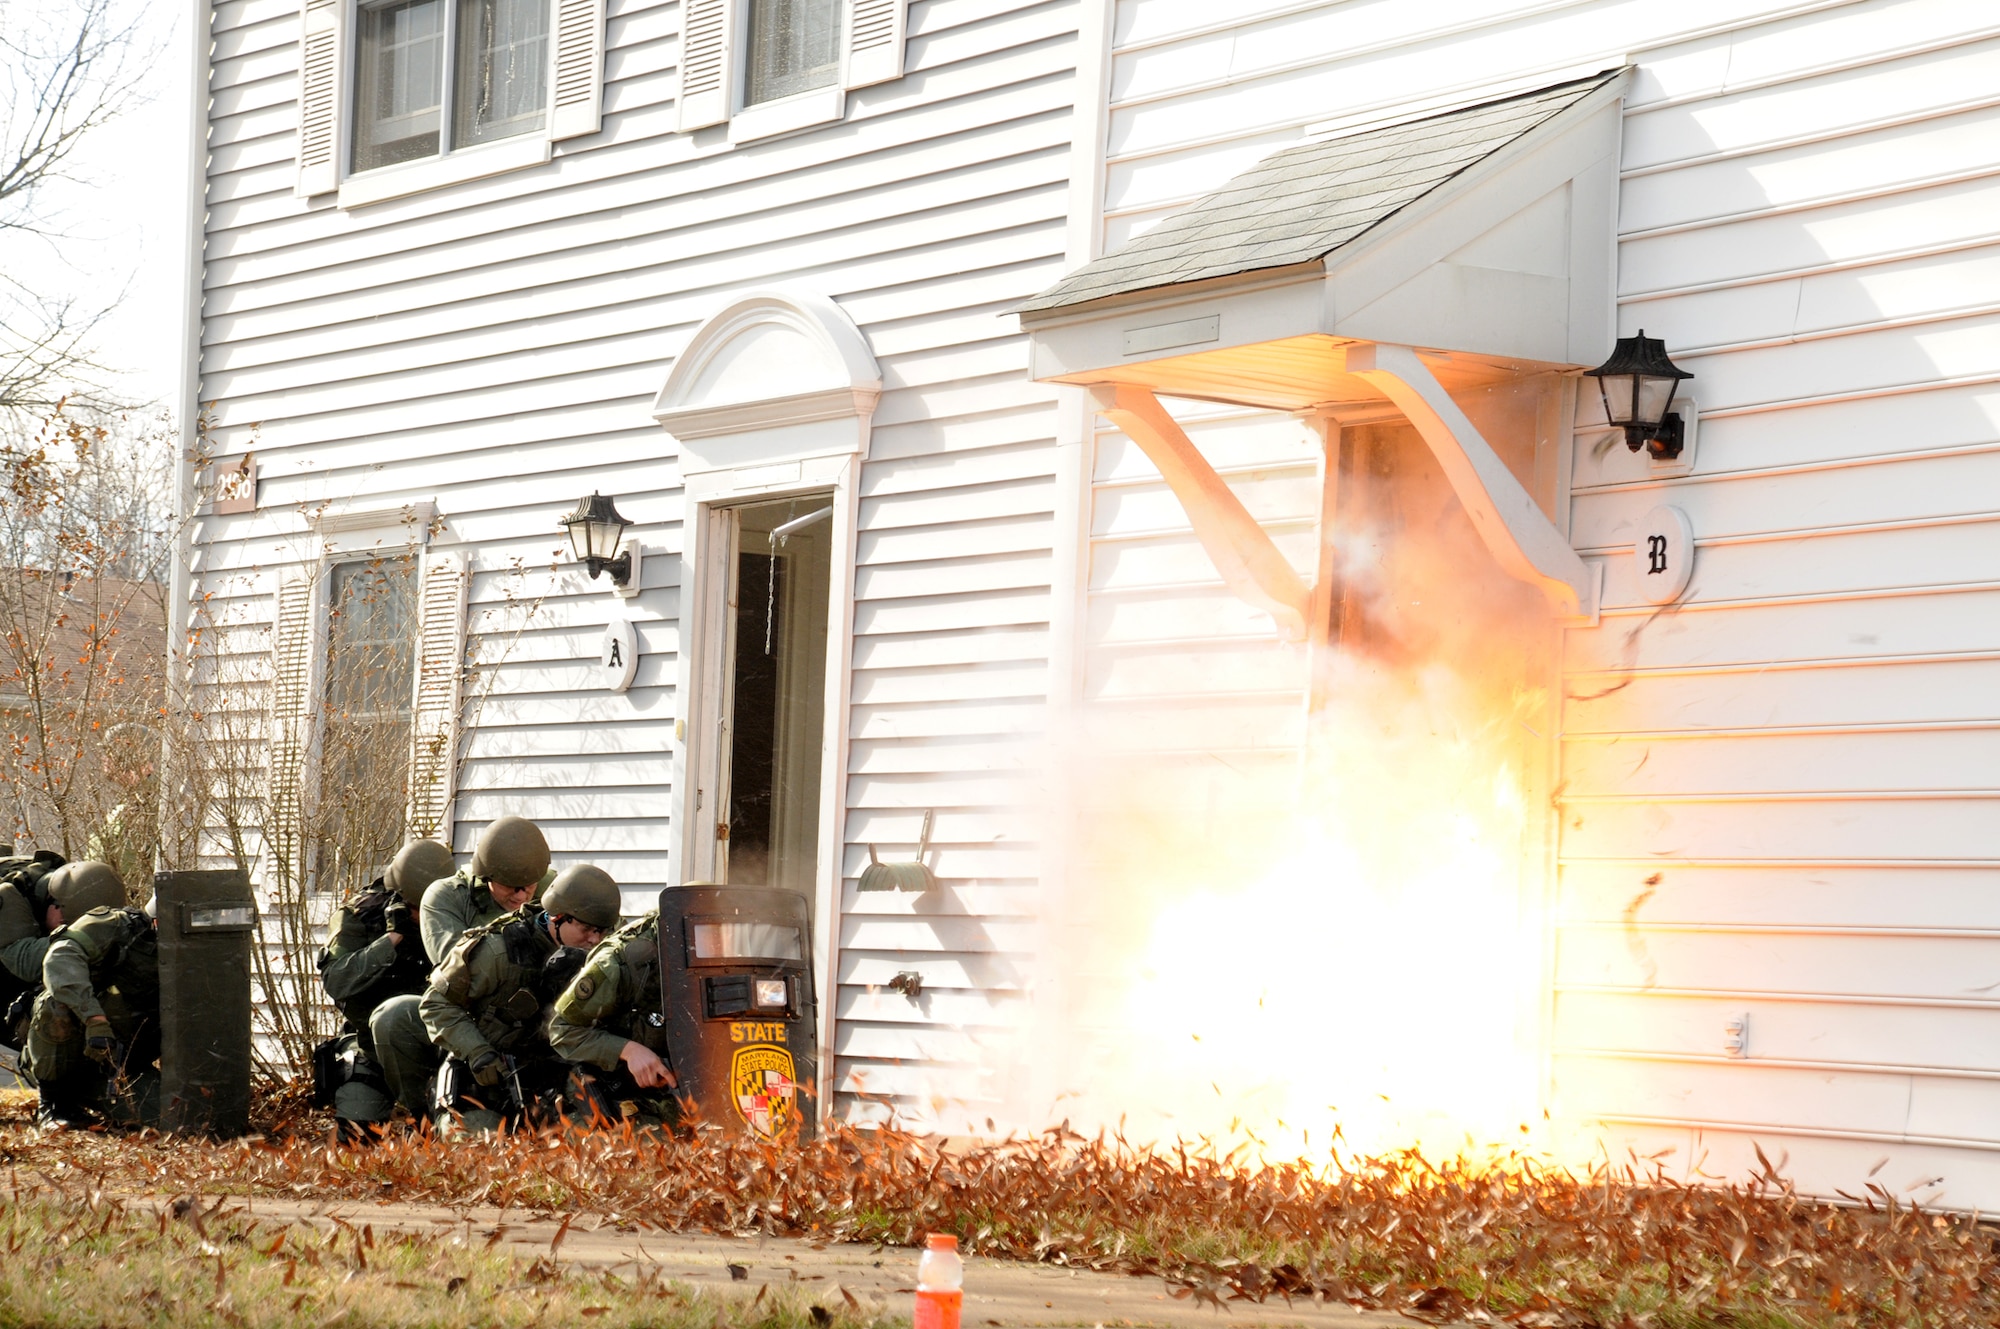 Members of the Maryland State Police Special Tactical Assault Team Element conduct a training exercise with 316th Security Forces Squadron members Jan. 19, 2010, at Joint Base Andrews, Md. The joint exercise, held in unusable base housing, is a means for the the 316th SFS and MDSP forces to pool experience, materials and other training techniques. The doorway explosion is the result of a simulated forced entry in the event armed inhabitants refused police access. (U.S. Air Force photo)